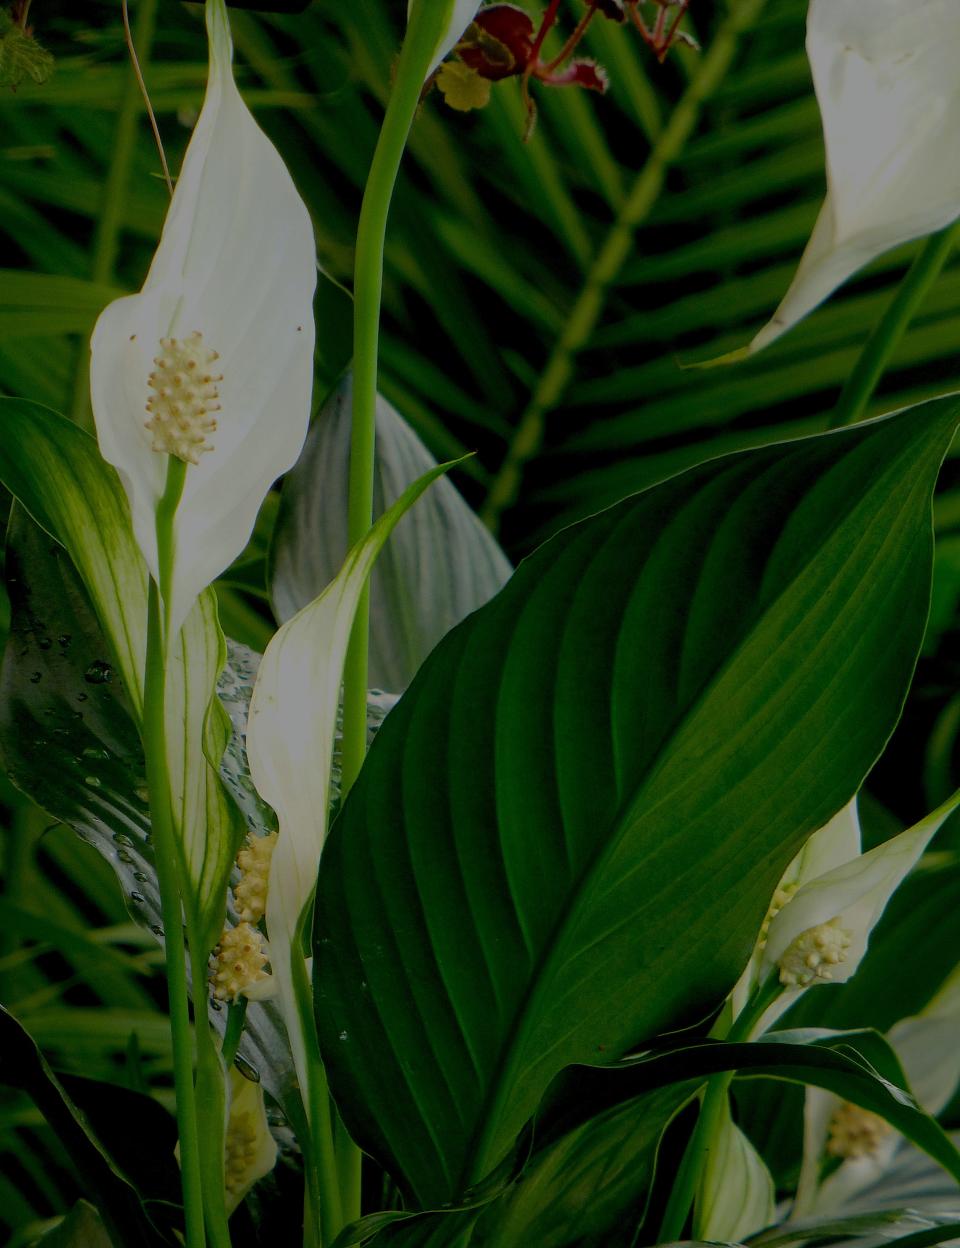 The Peace Lily is not only an attractive houseplant with its unusual, creamy white inflorescence, but its broad leaves may purify the air. The Peace Lily makes a great winter-time houseplant.